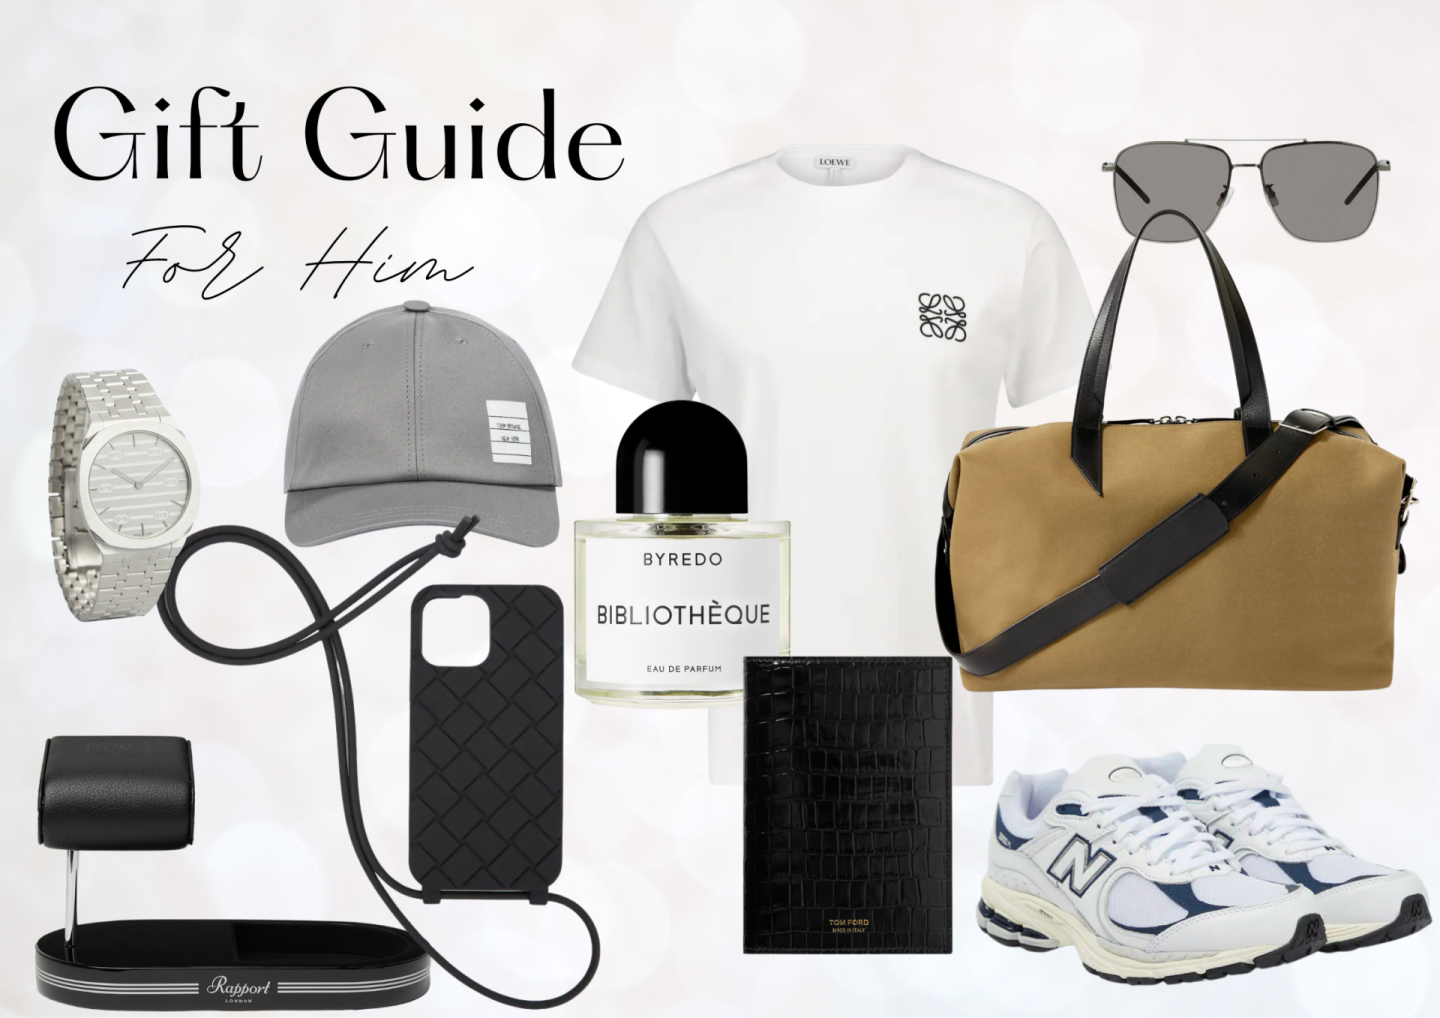 GIFT GUIDE | FOR HIM